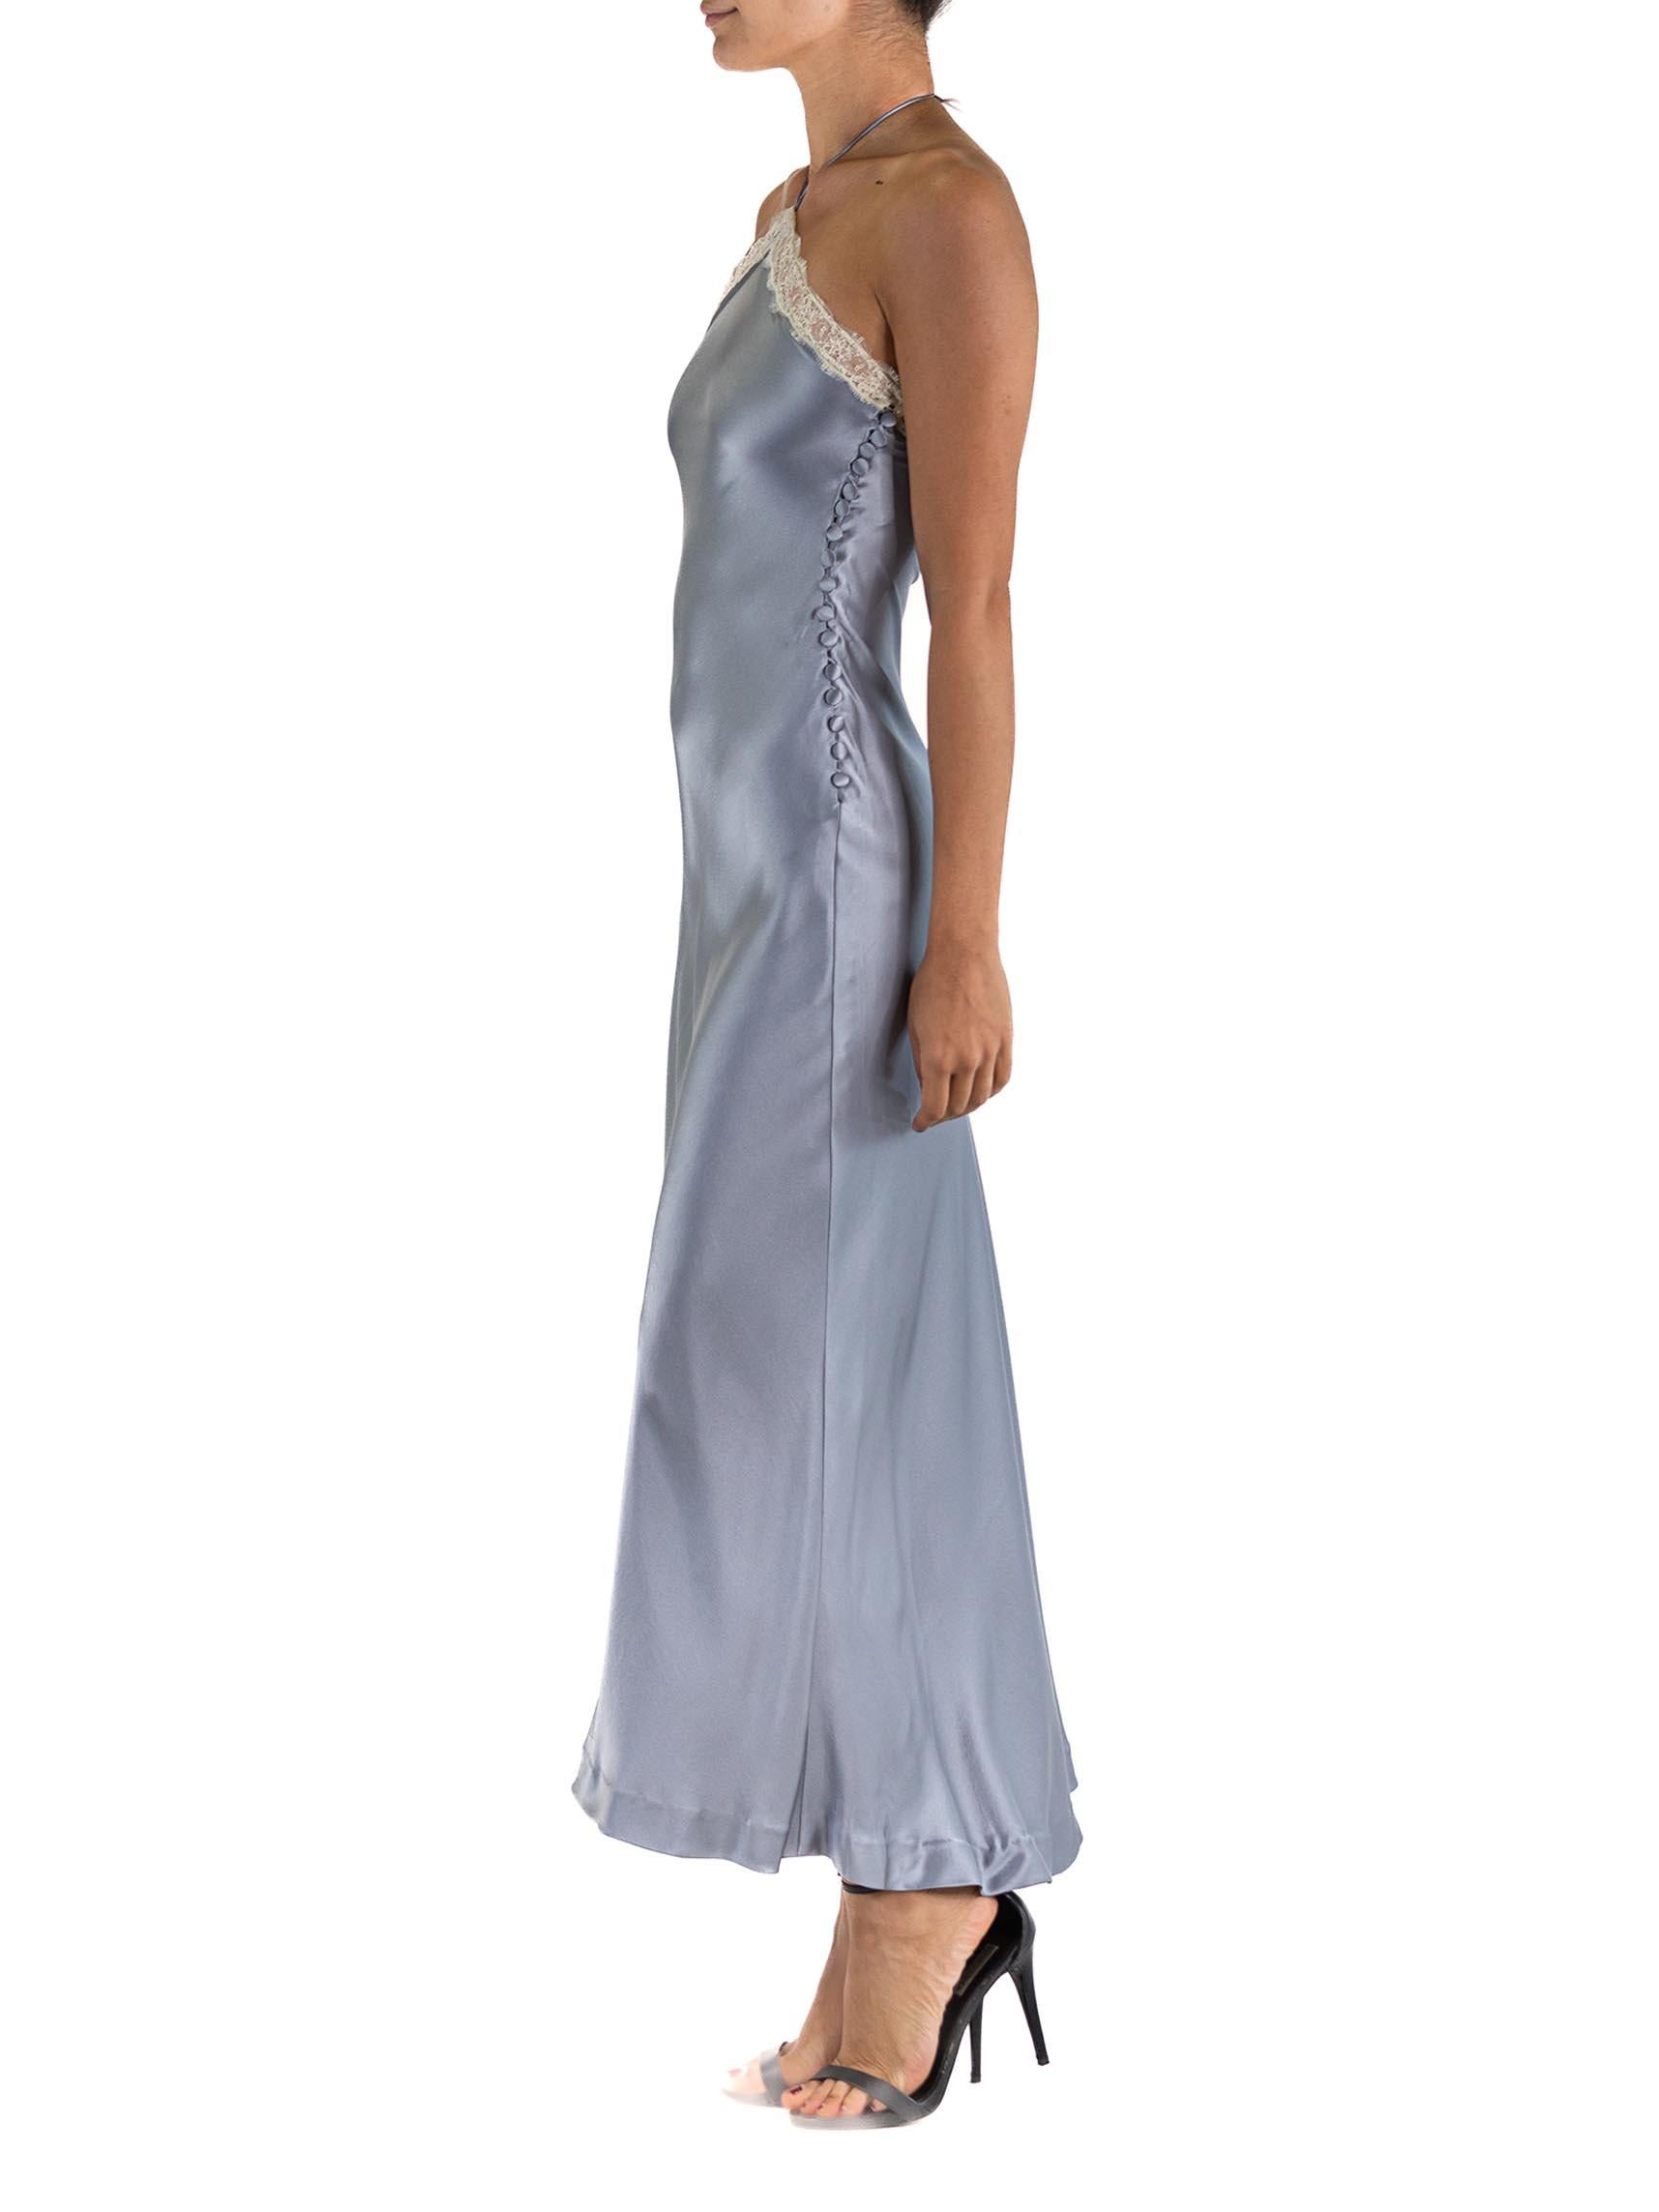 1990S CHLOE Silver Bias Cut Silk Charmeuse  Halter Gown With Lace Trim & Galliano Style Side Buttons